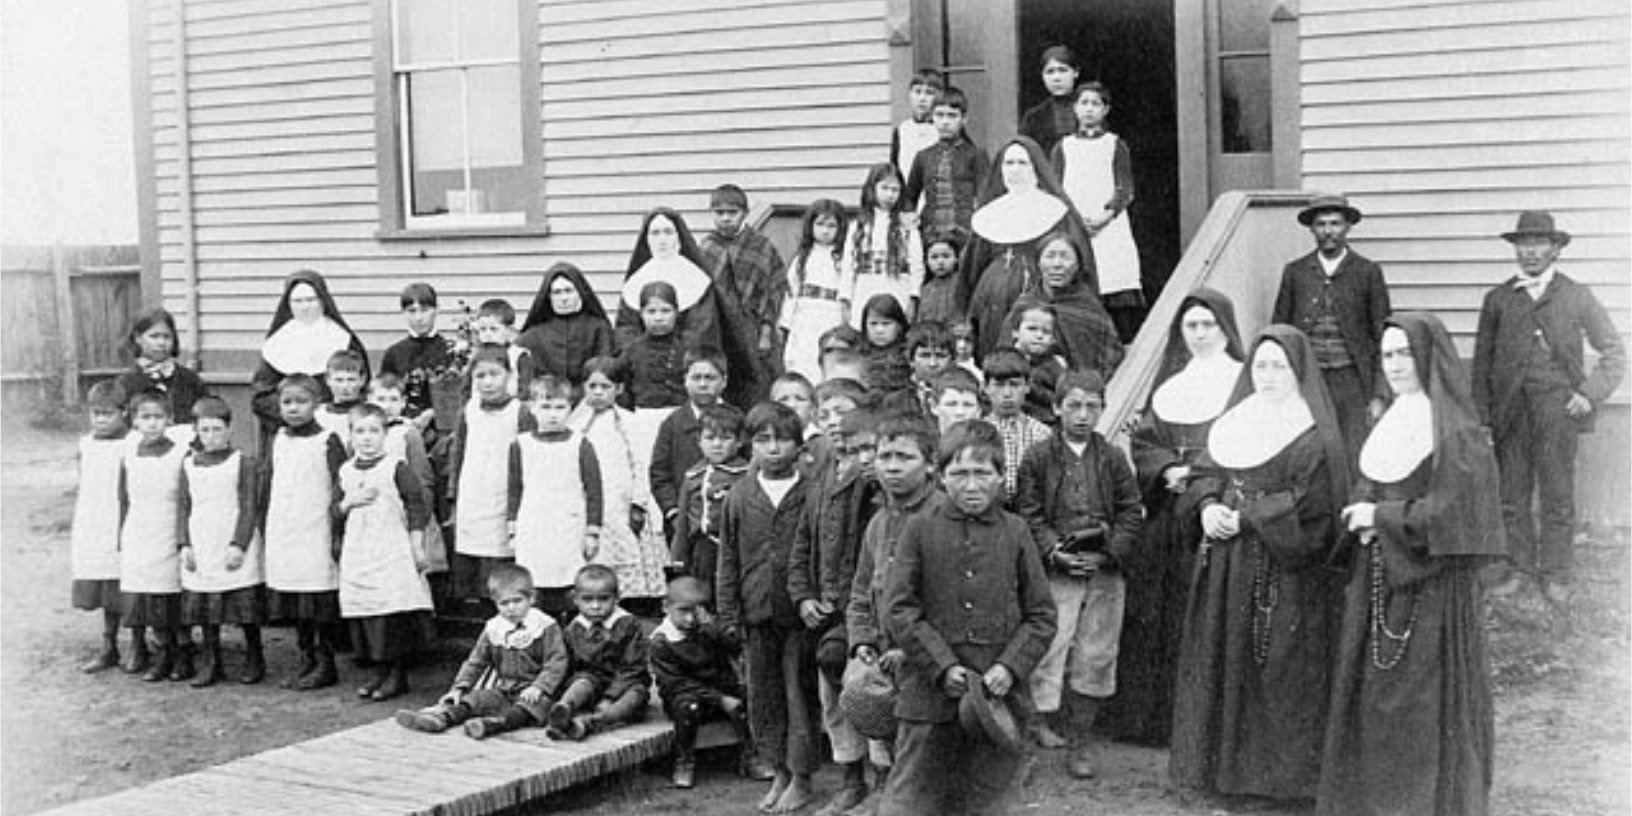 Residential School, 1890, Quebec. Photo: H.J. Woodside / Library and Archives Canada / PA-123707